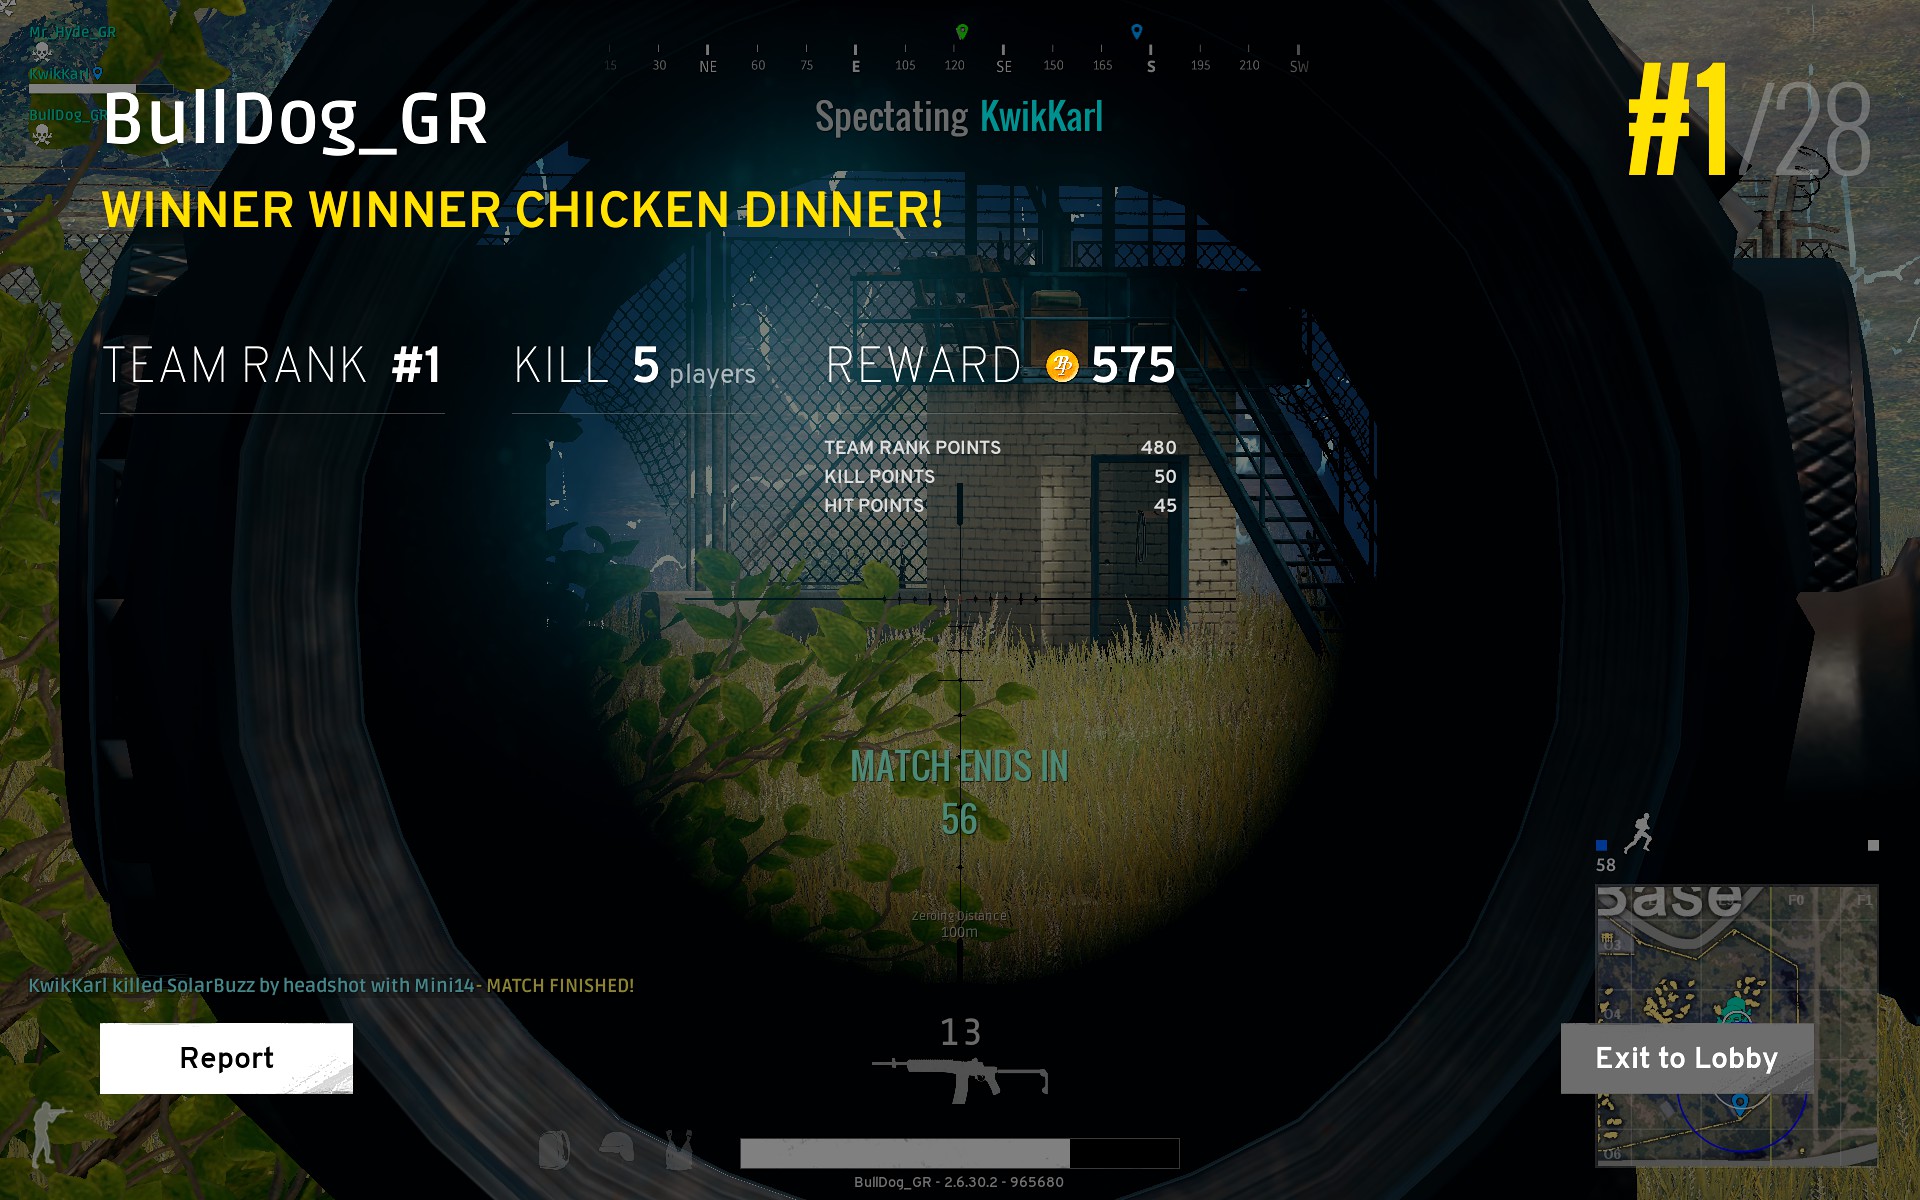 Lets see your Winner Winner Chicken Dinner screenshots! - Page 2 8946A836F5ED013483494BFB31D99AF350529236